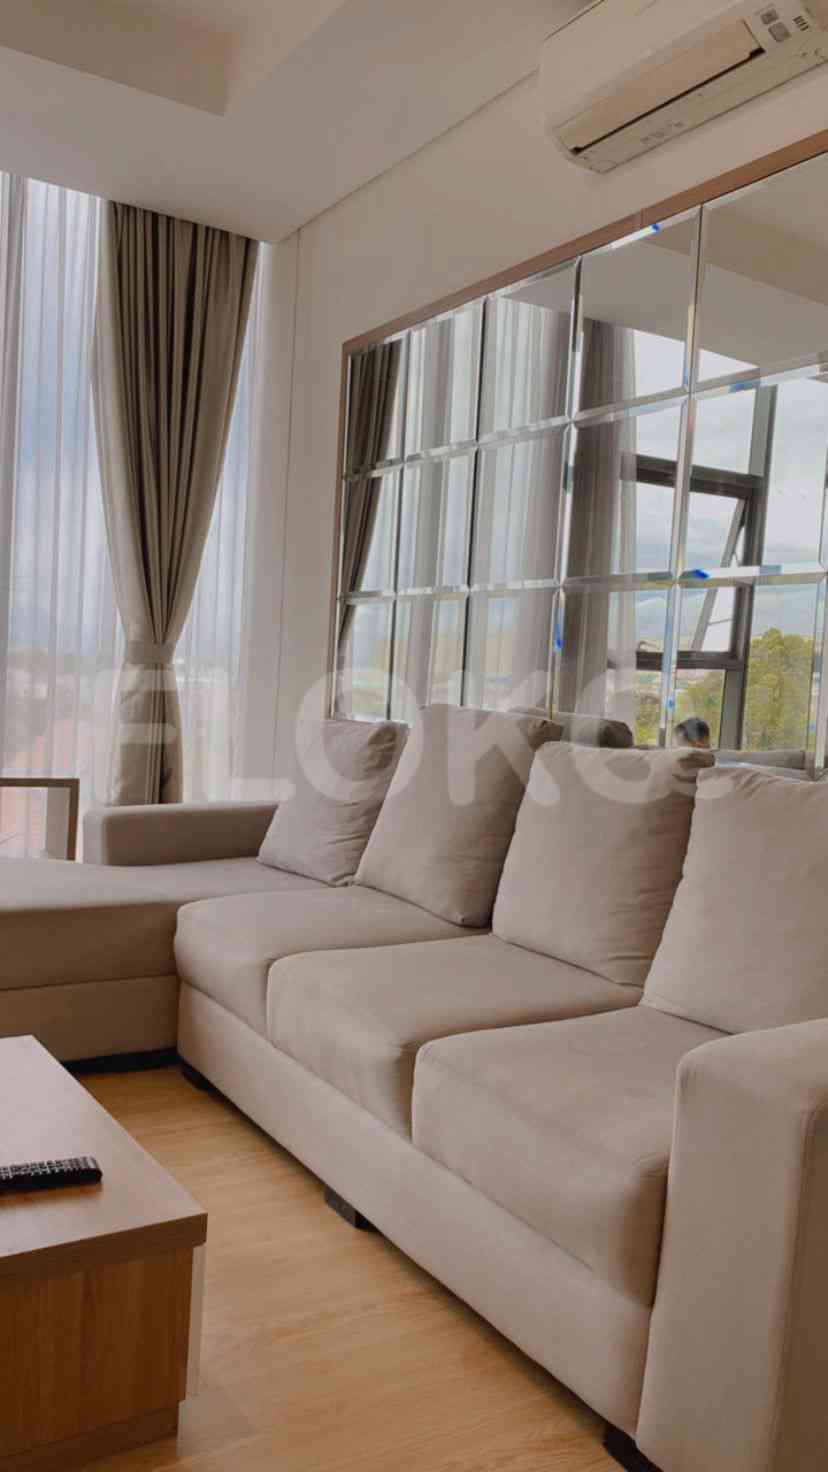 3 Bedroom on 15th Floor for Rent in Lavanue Apartment - fpa8ba 2